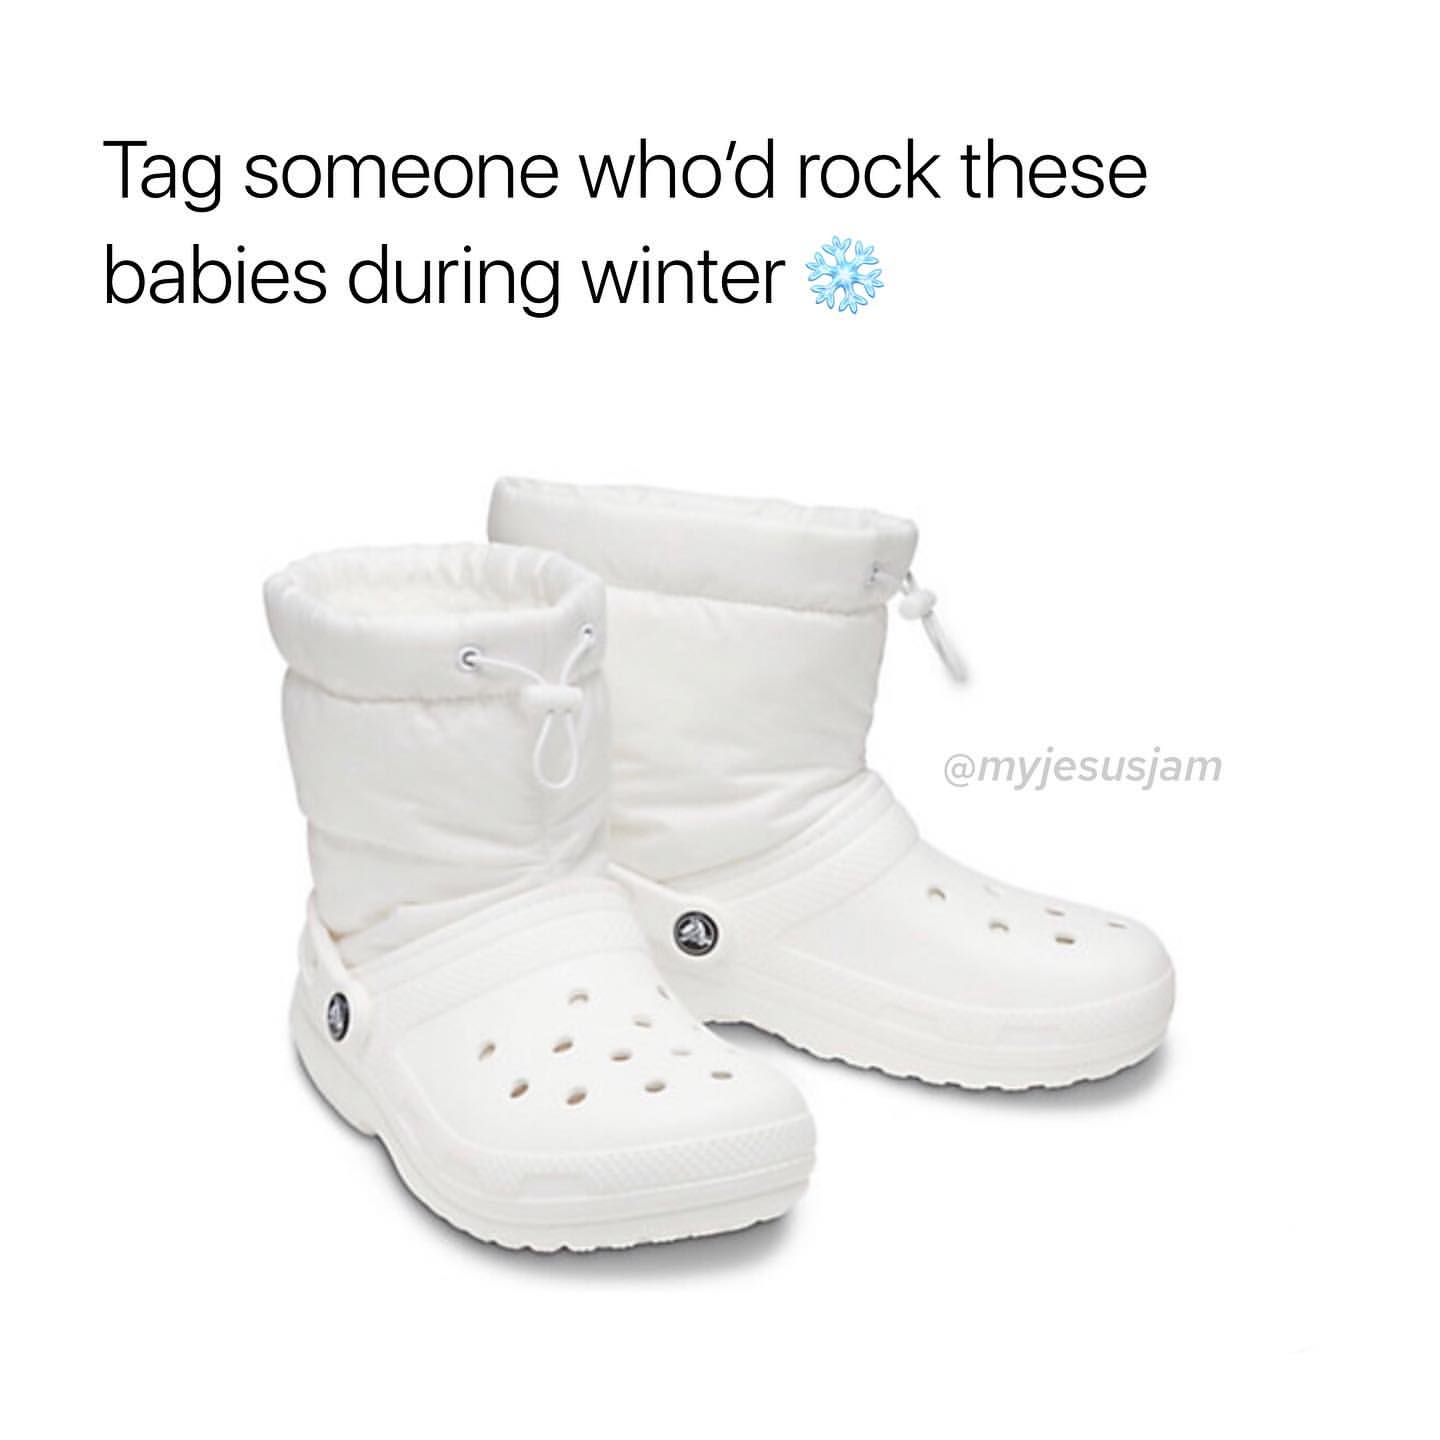 Tag someone who'd rock these babies during winter.